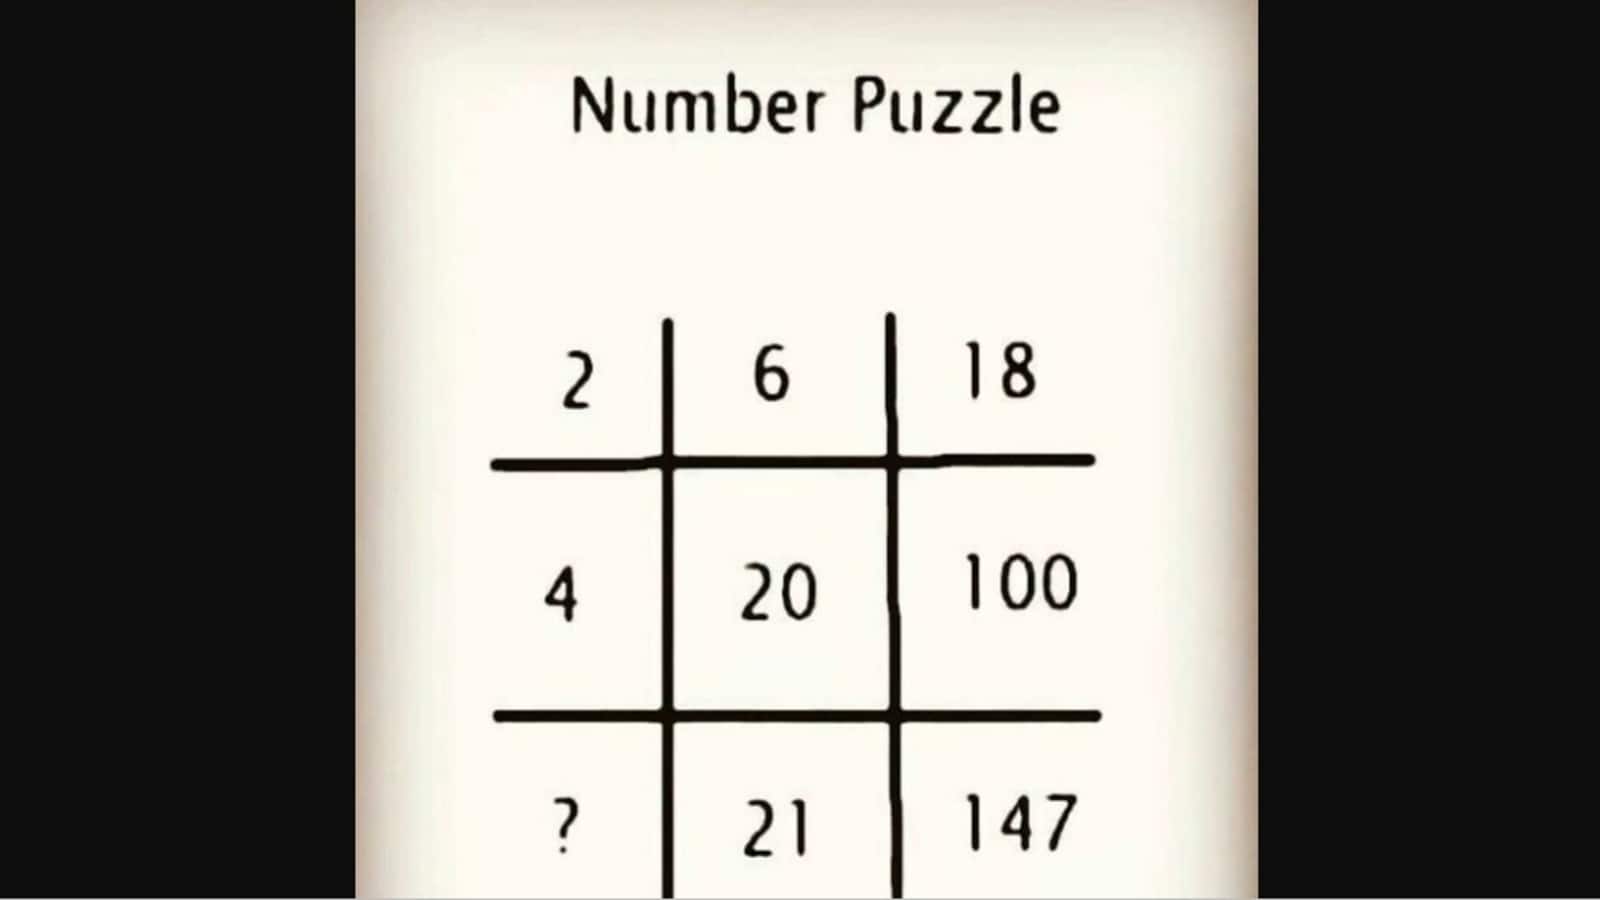 Put your brain to the test with this interesting number puzzle